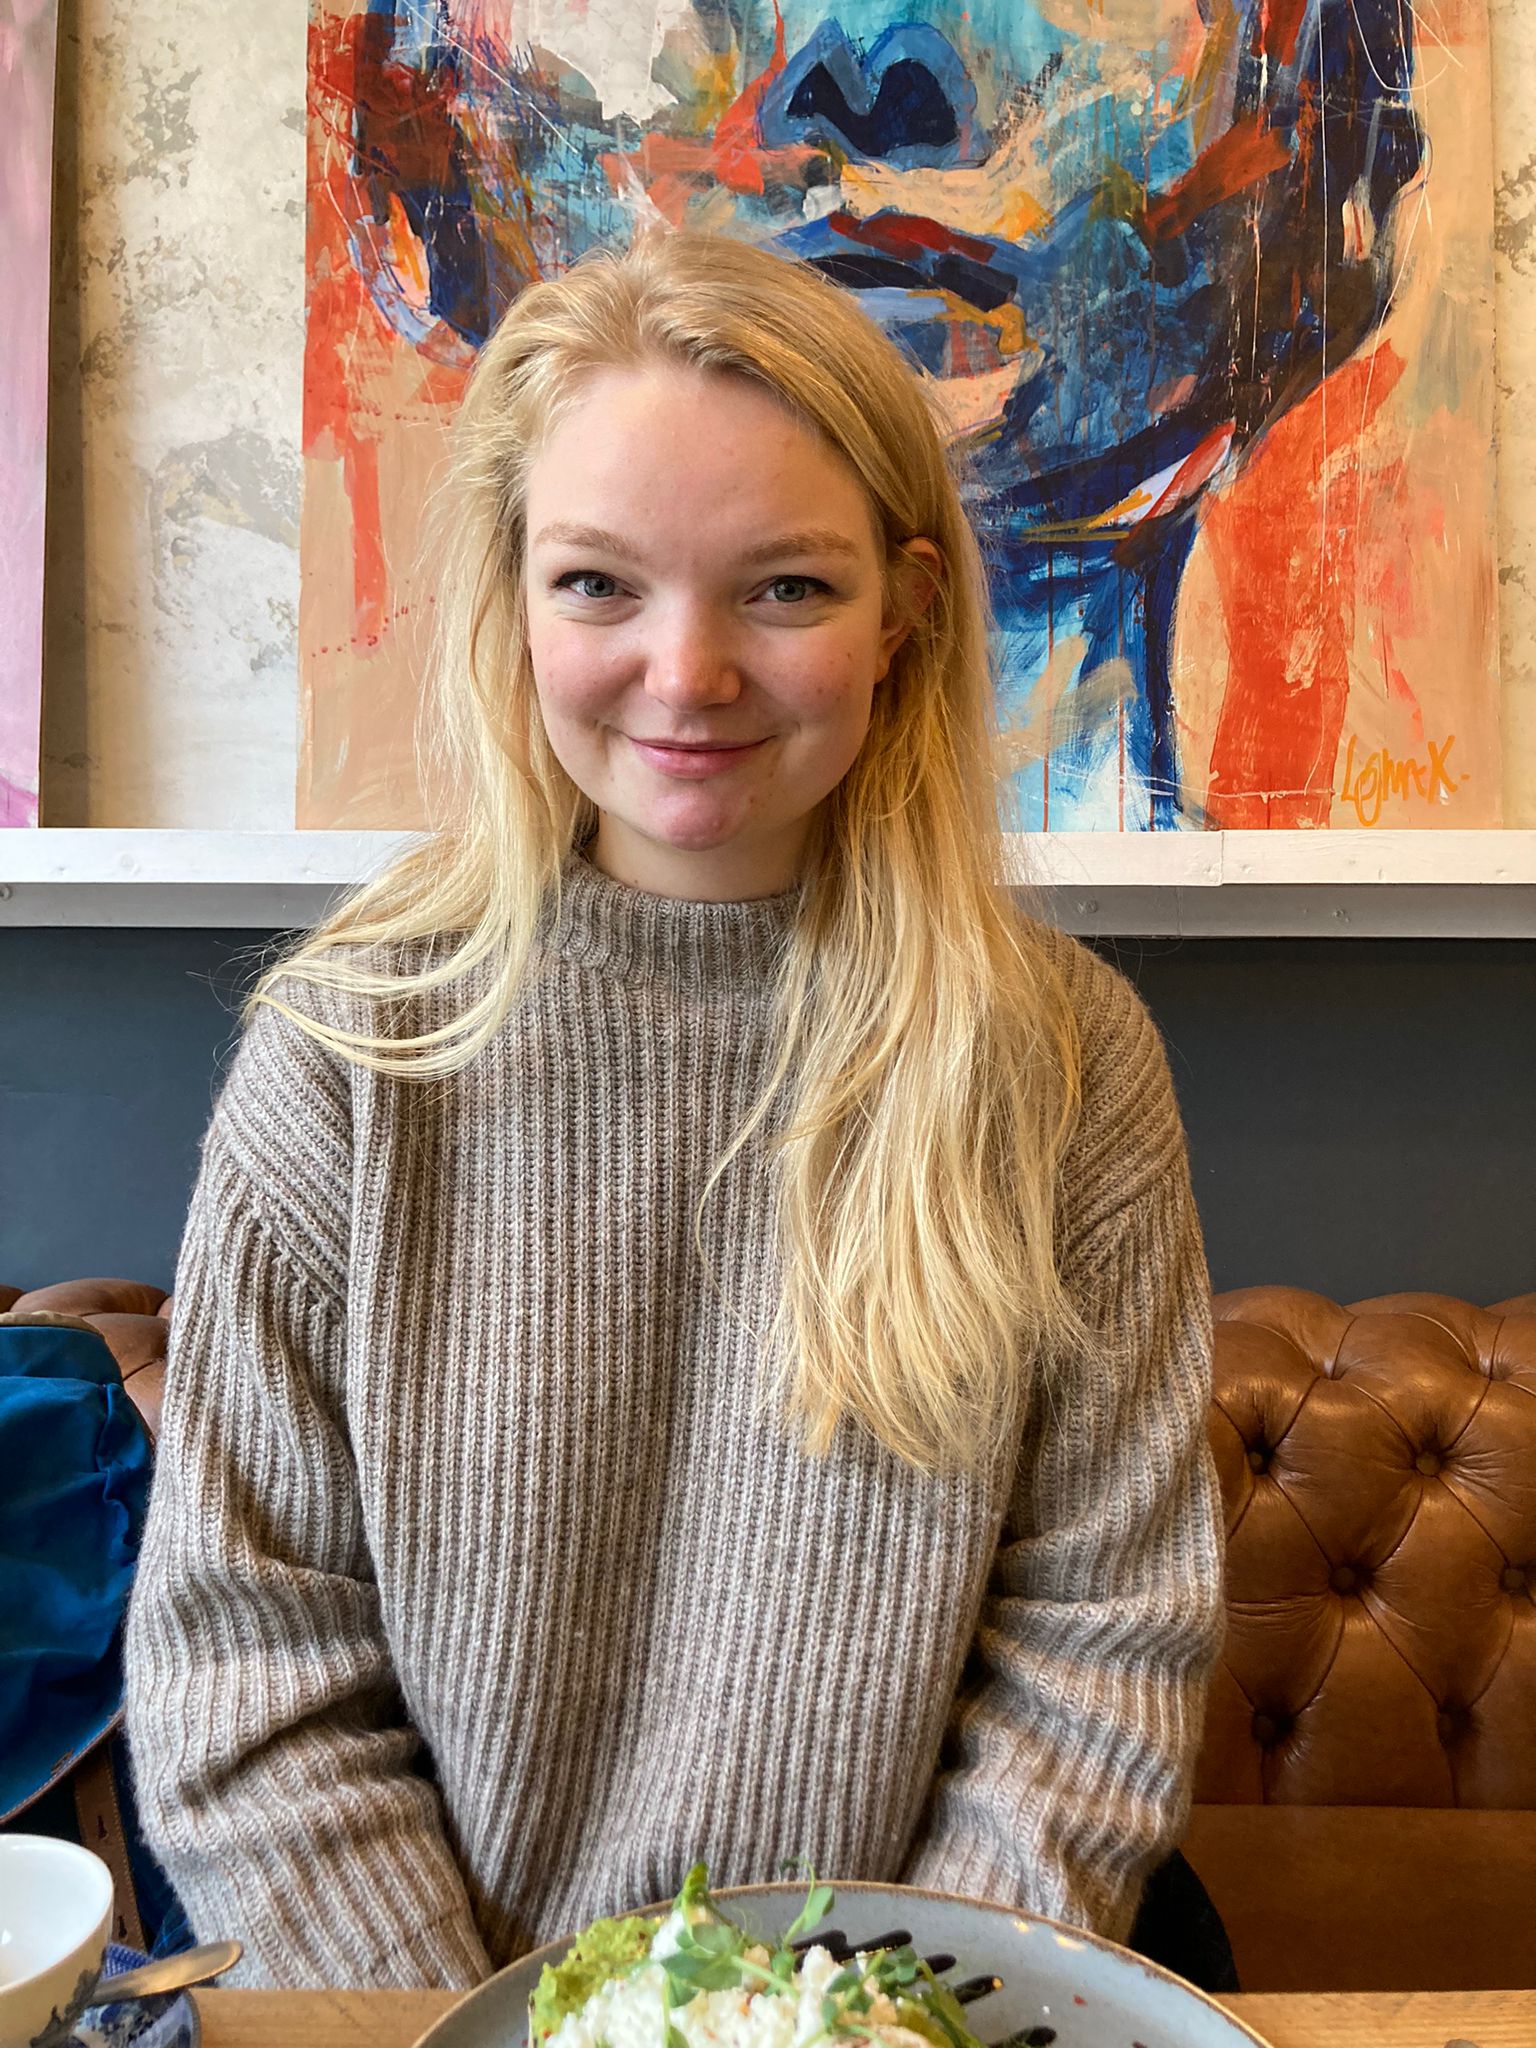 Georgia is smiling head-on at the camera. There is a sandstone wall behind her, with colourful curtains. She is a white cis-gender woman, has chest-length blonde hair, and is wearing a grey sweater.